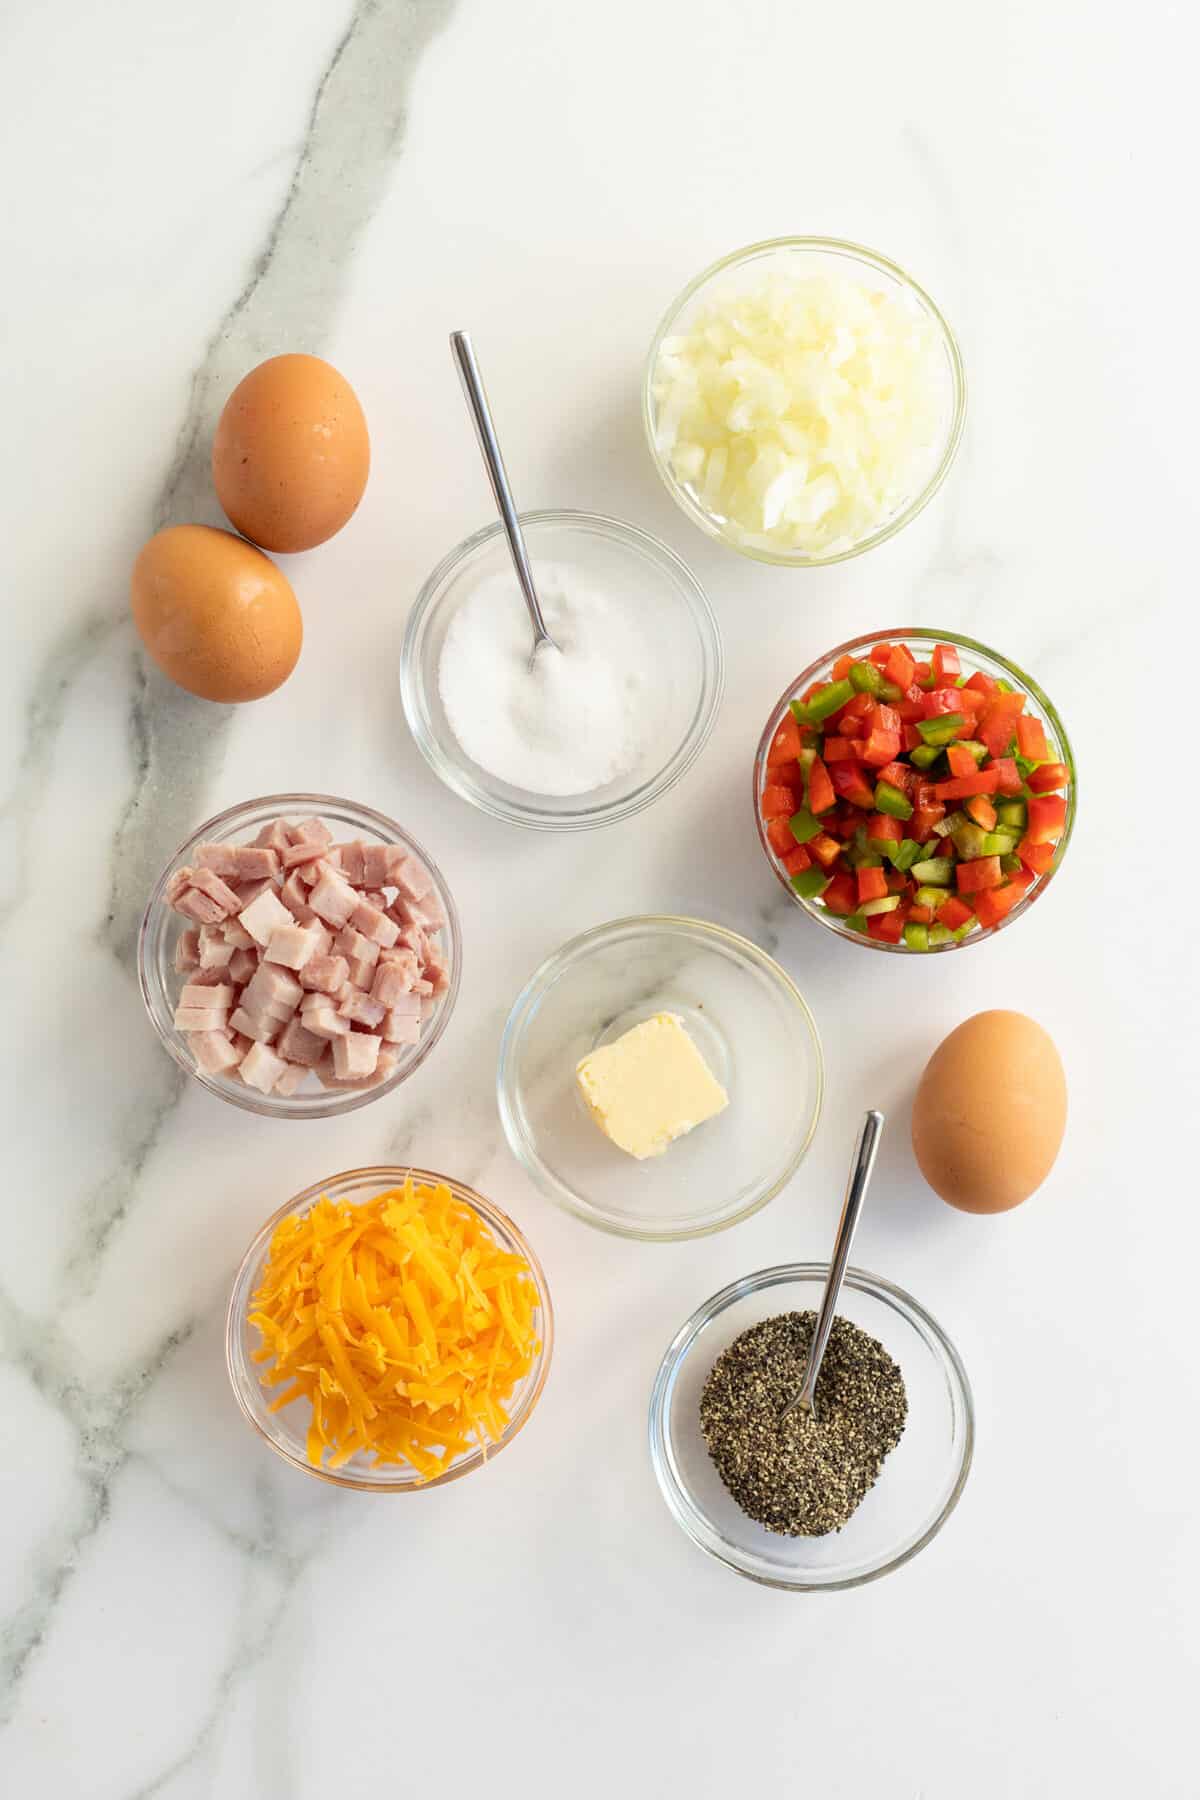 Denver omelet ingredients in small clear bowls